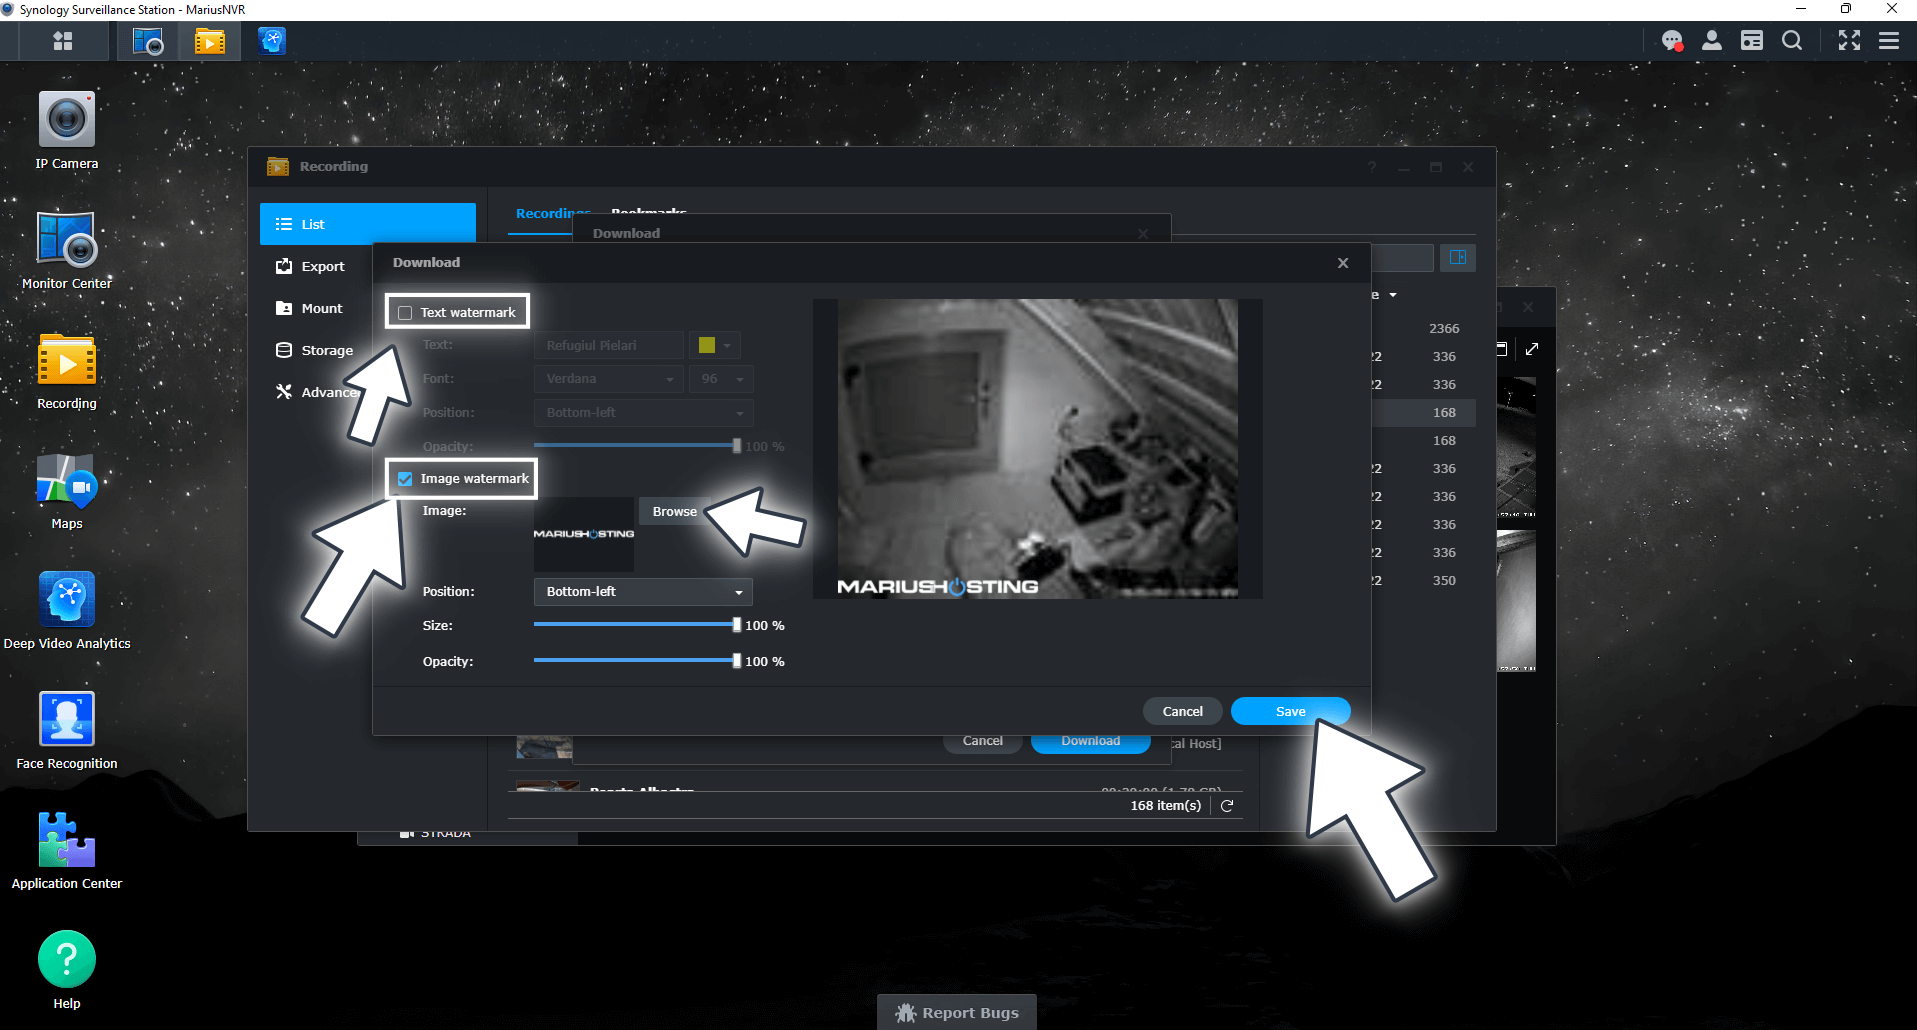 Synology Watermark in Surveillance Station 3